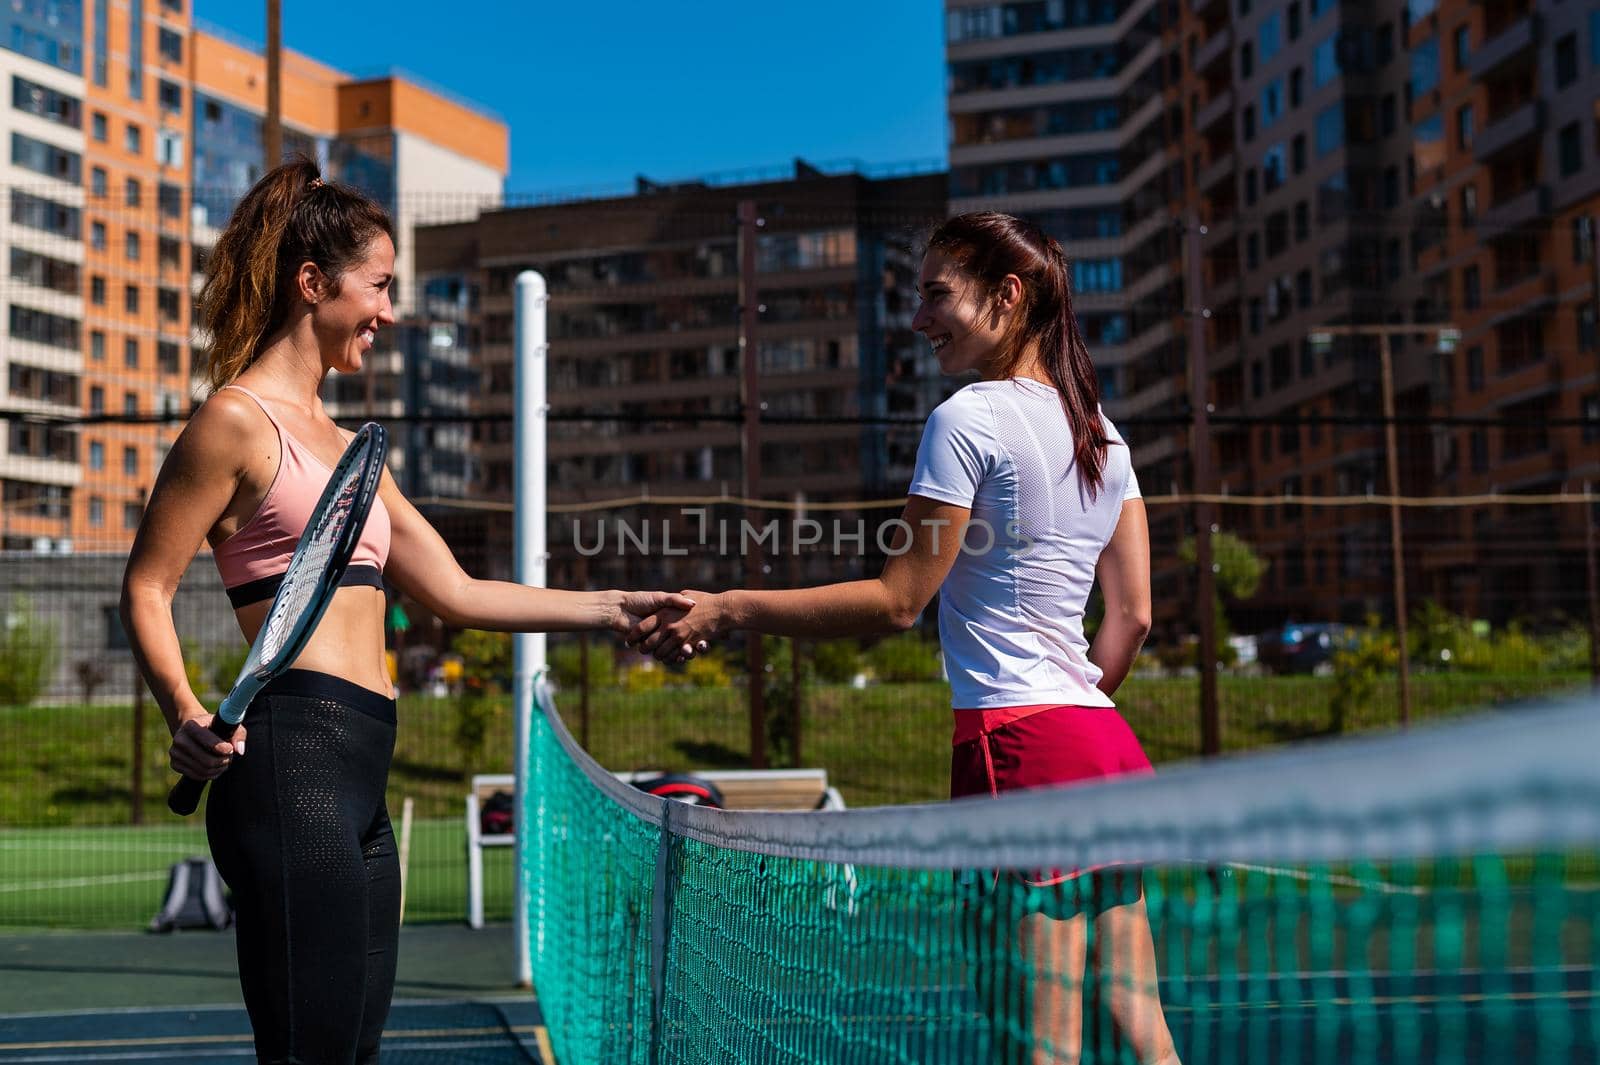 Two Caucasian women in sportswear shake hands after a tennis match on outdoor court